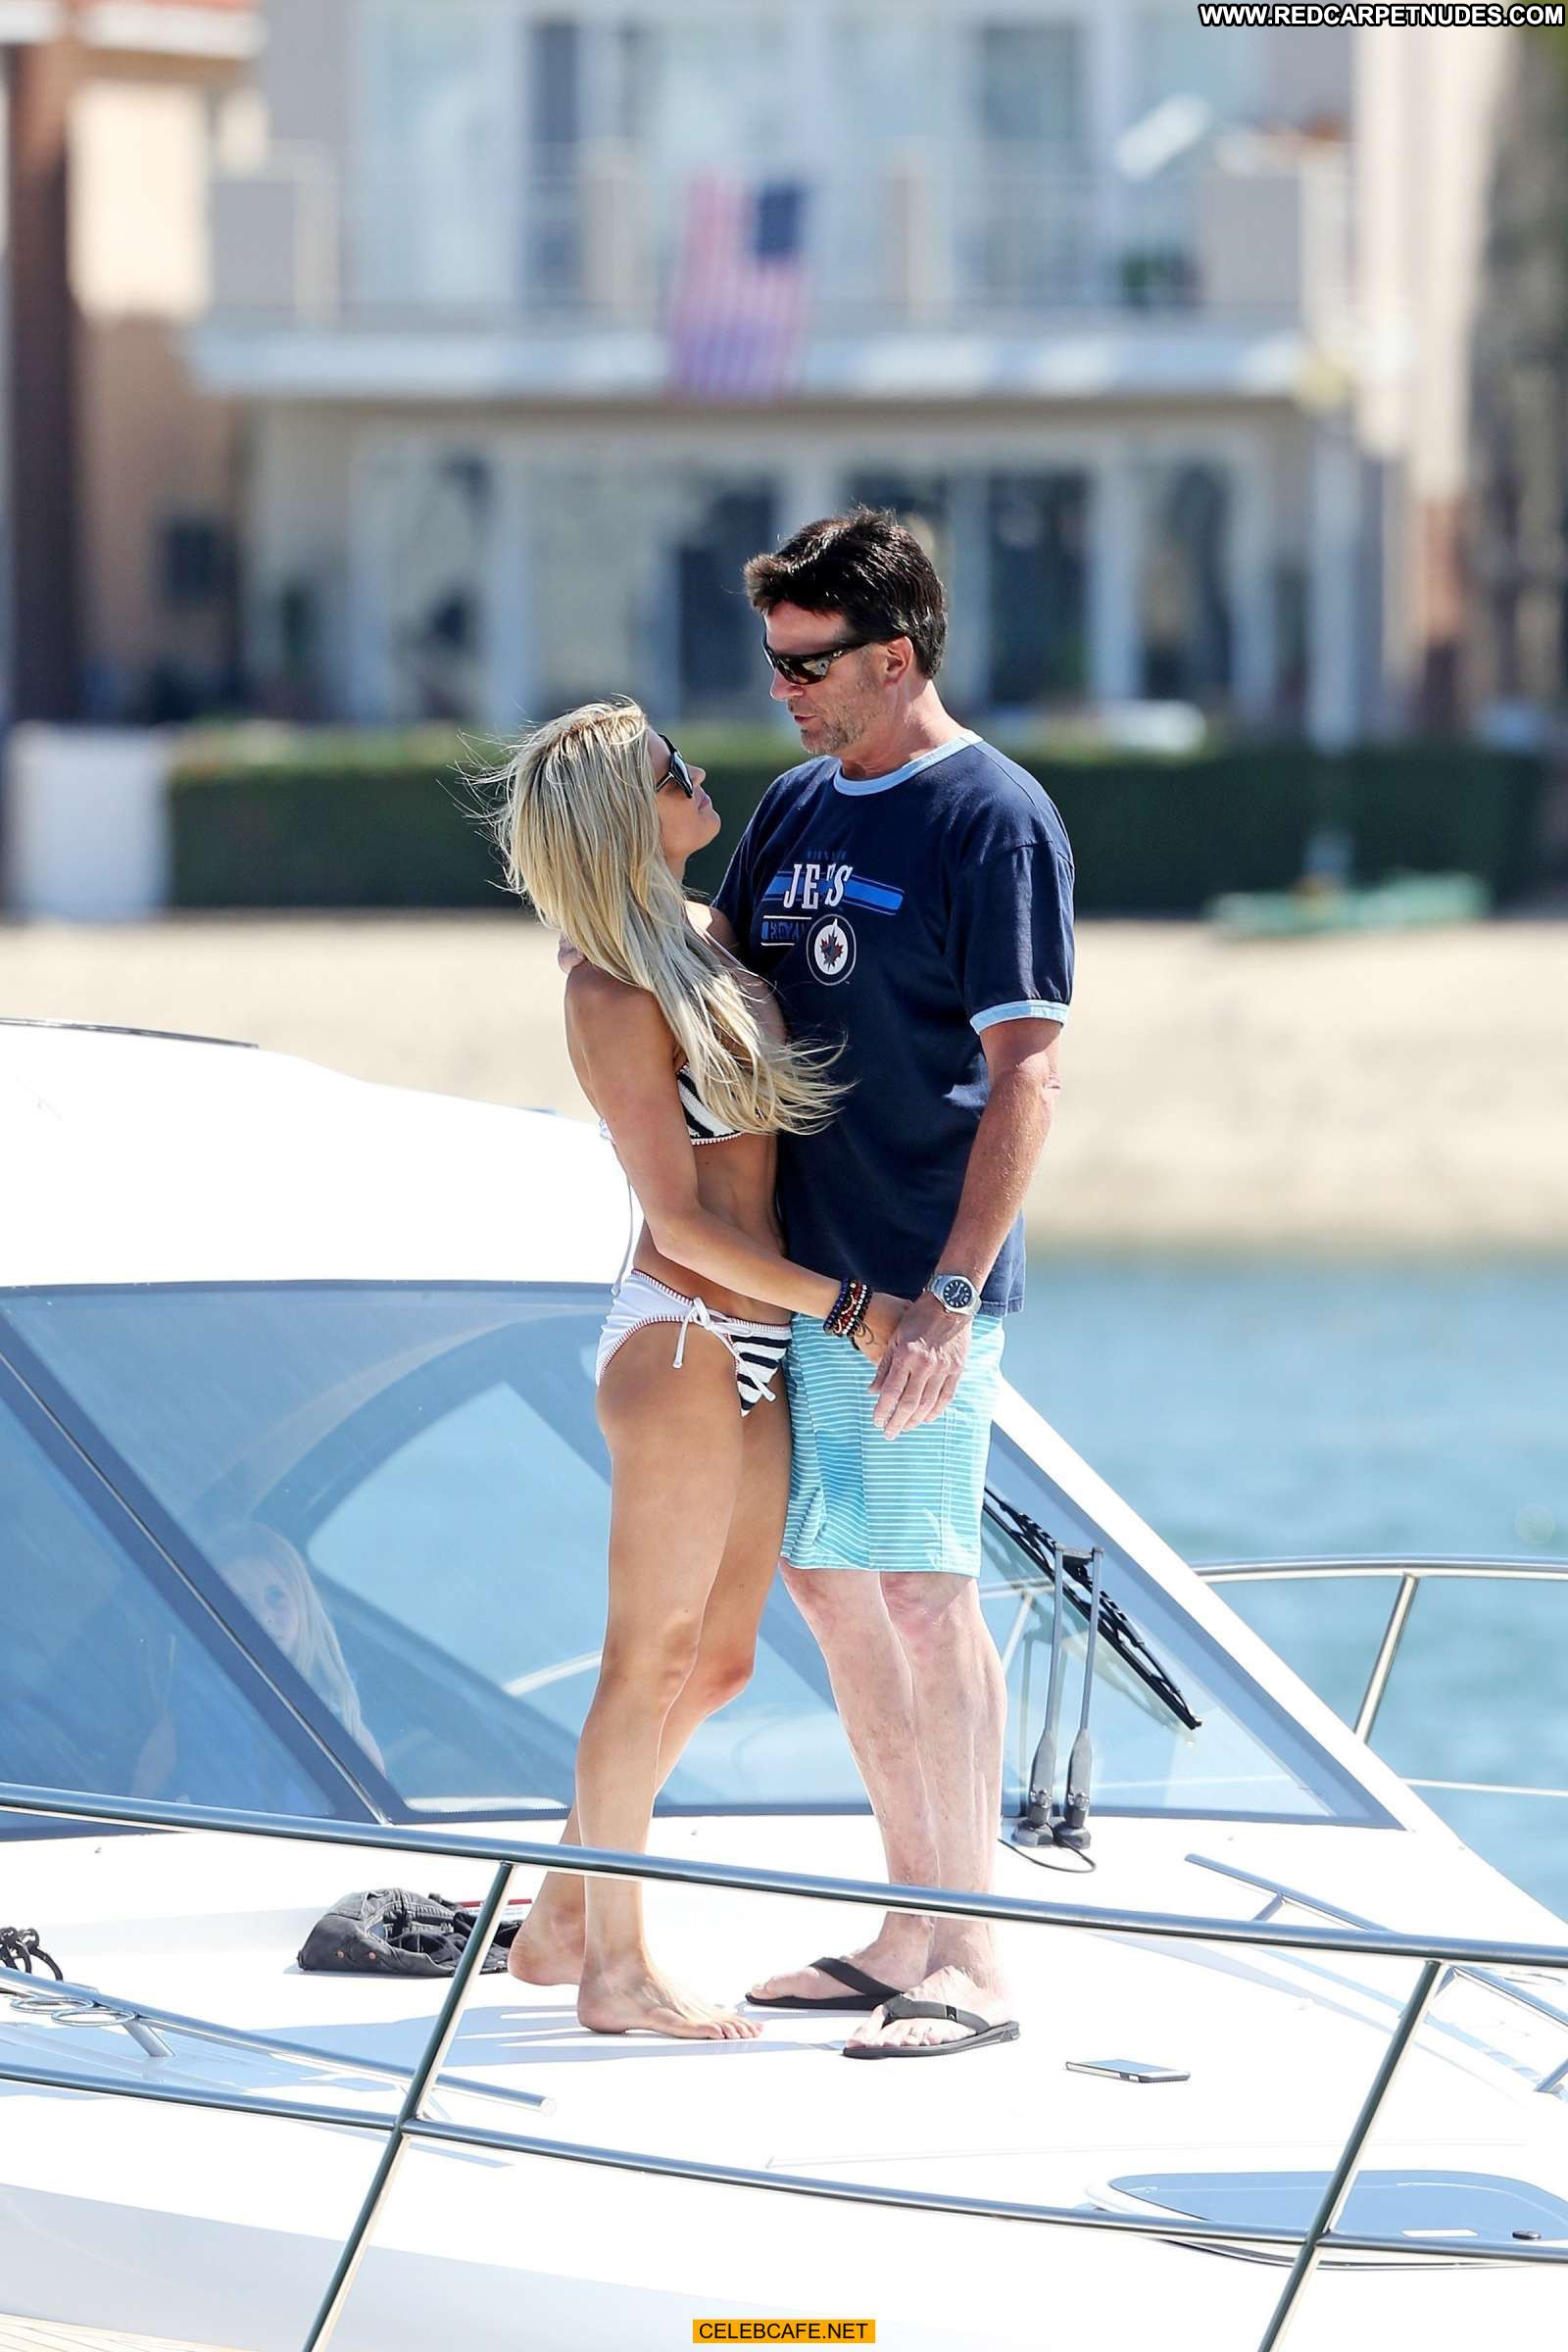 Christina El Moussa Works Bikini Body on 4th of July With 